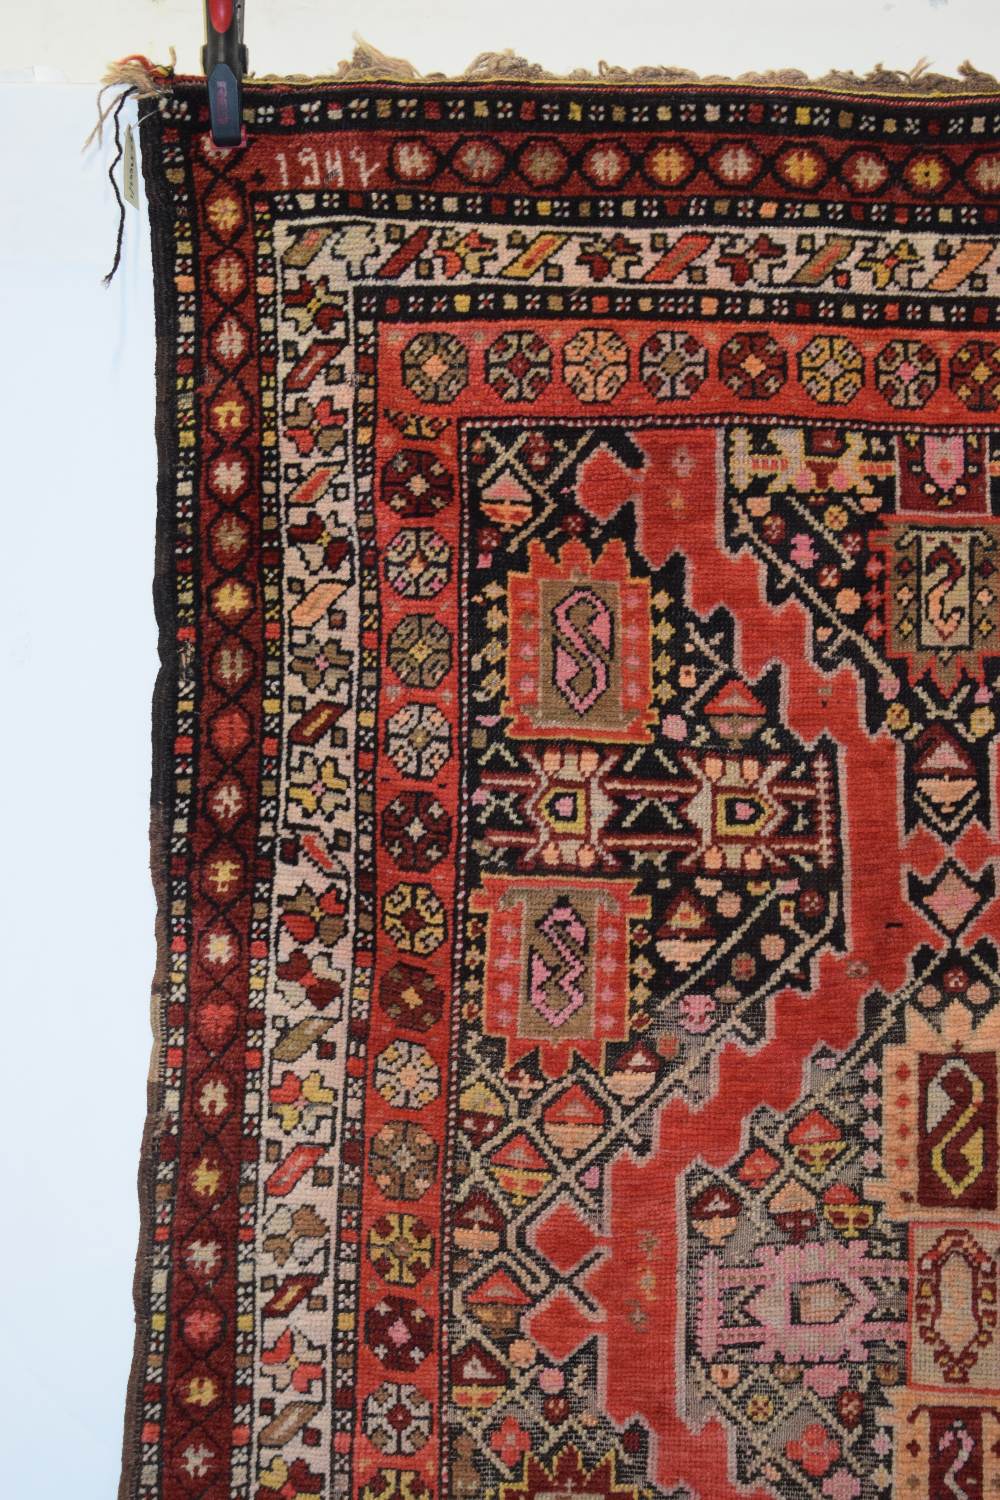 Karabakh rug, south west Caucasus, circa 1930s-40s, 10ft. 6in. X 4ft. 4in. 3.20m. X 1.32m. Date 1949 - Image 7 of 13